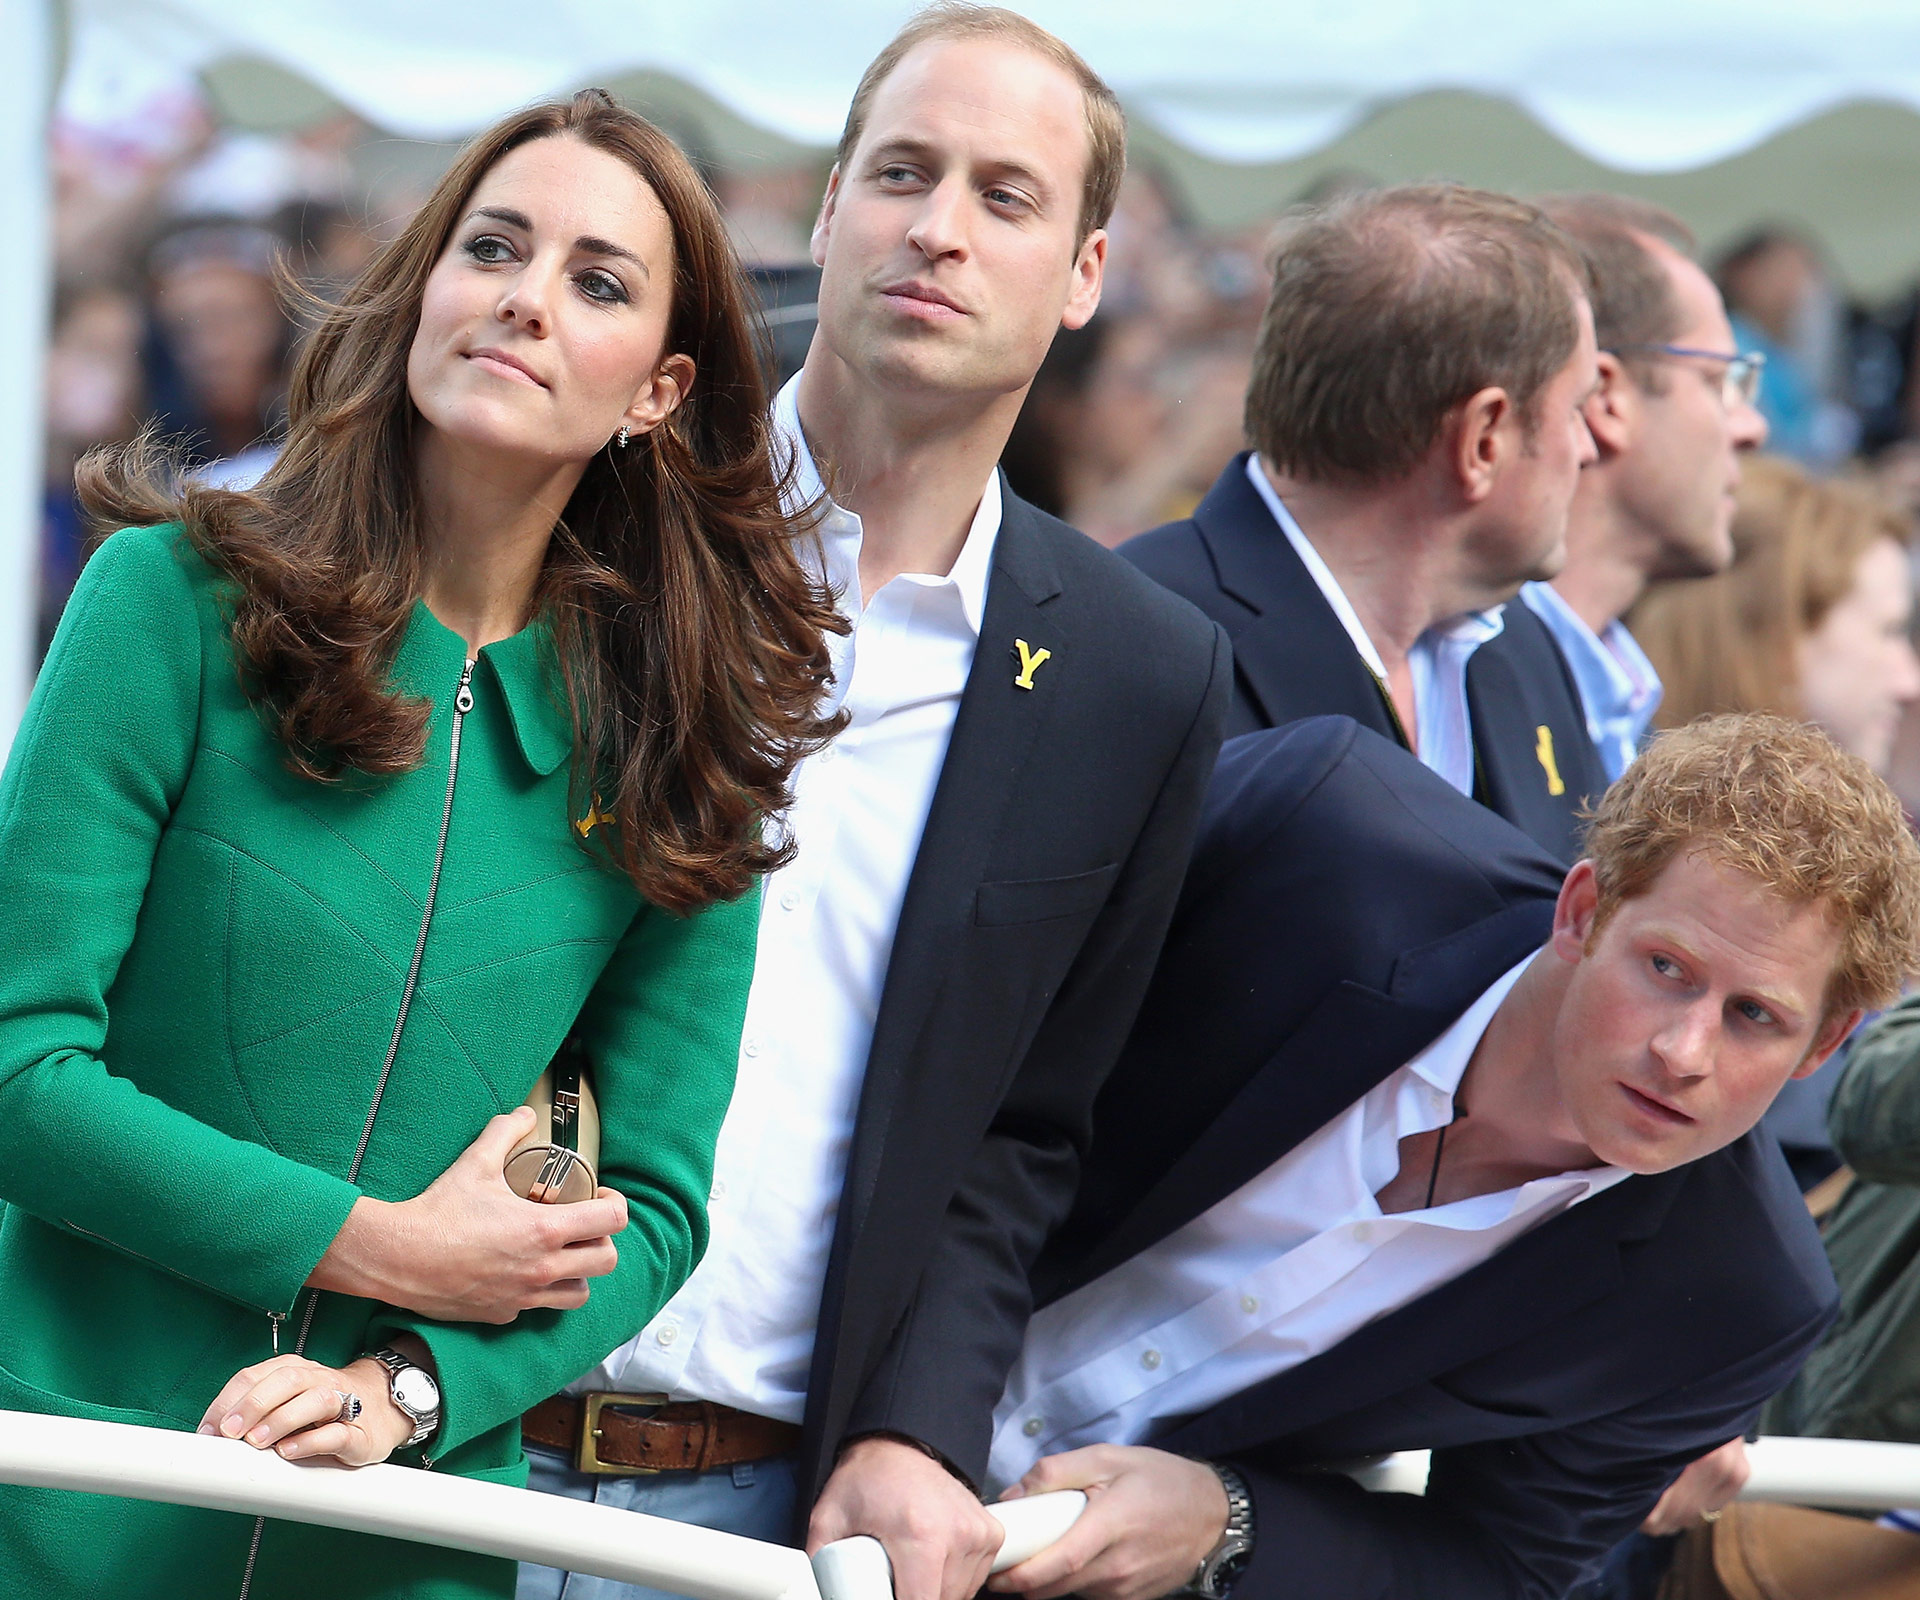 Prince William, Kate and Prince Harry